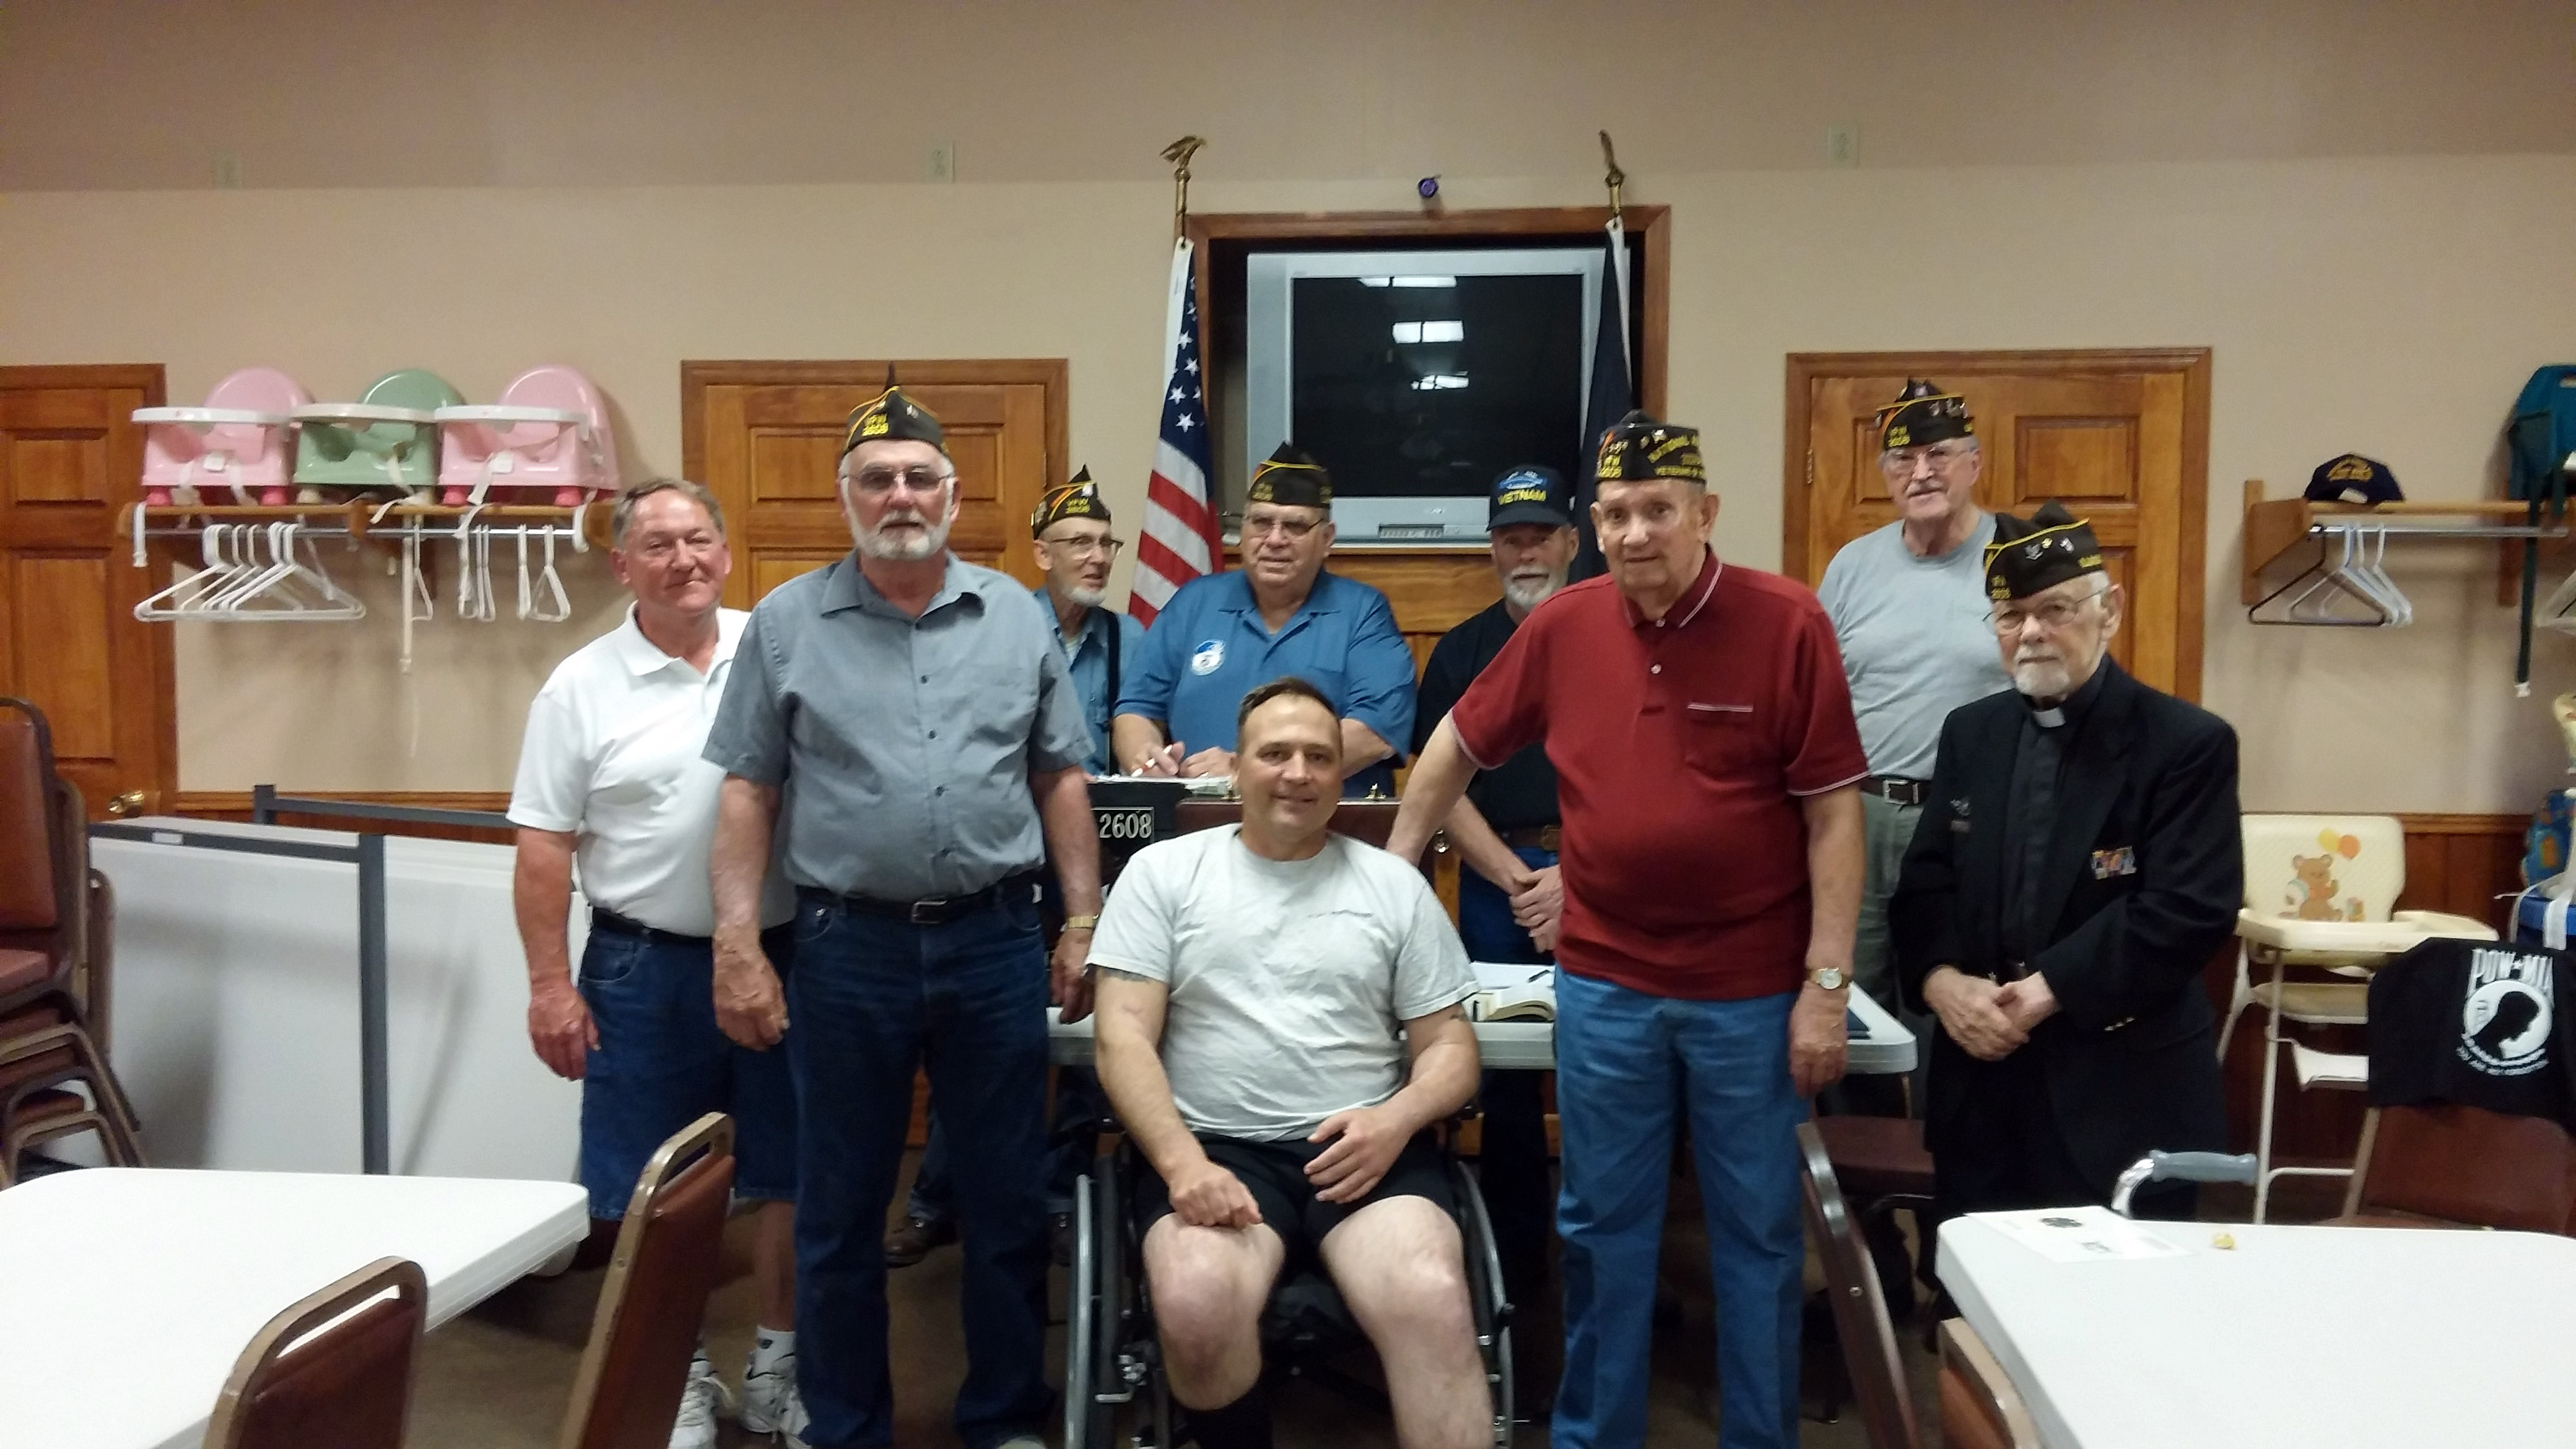 Picture of VFW members